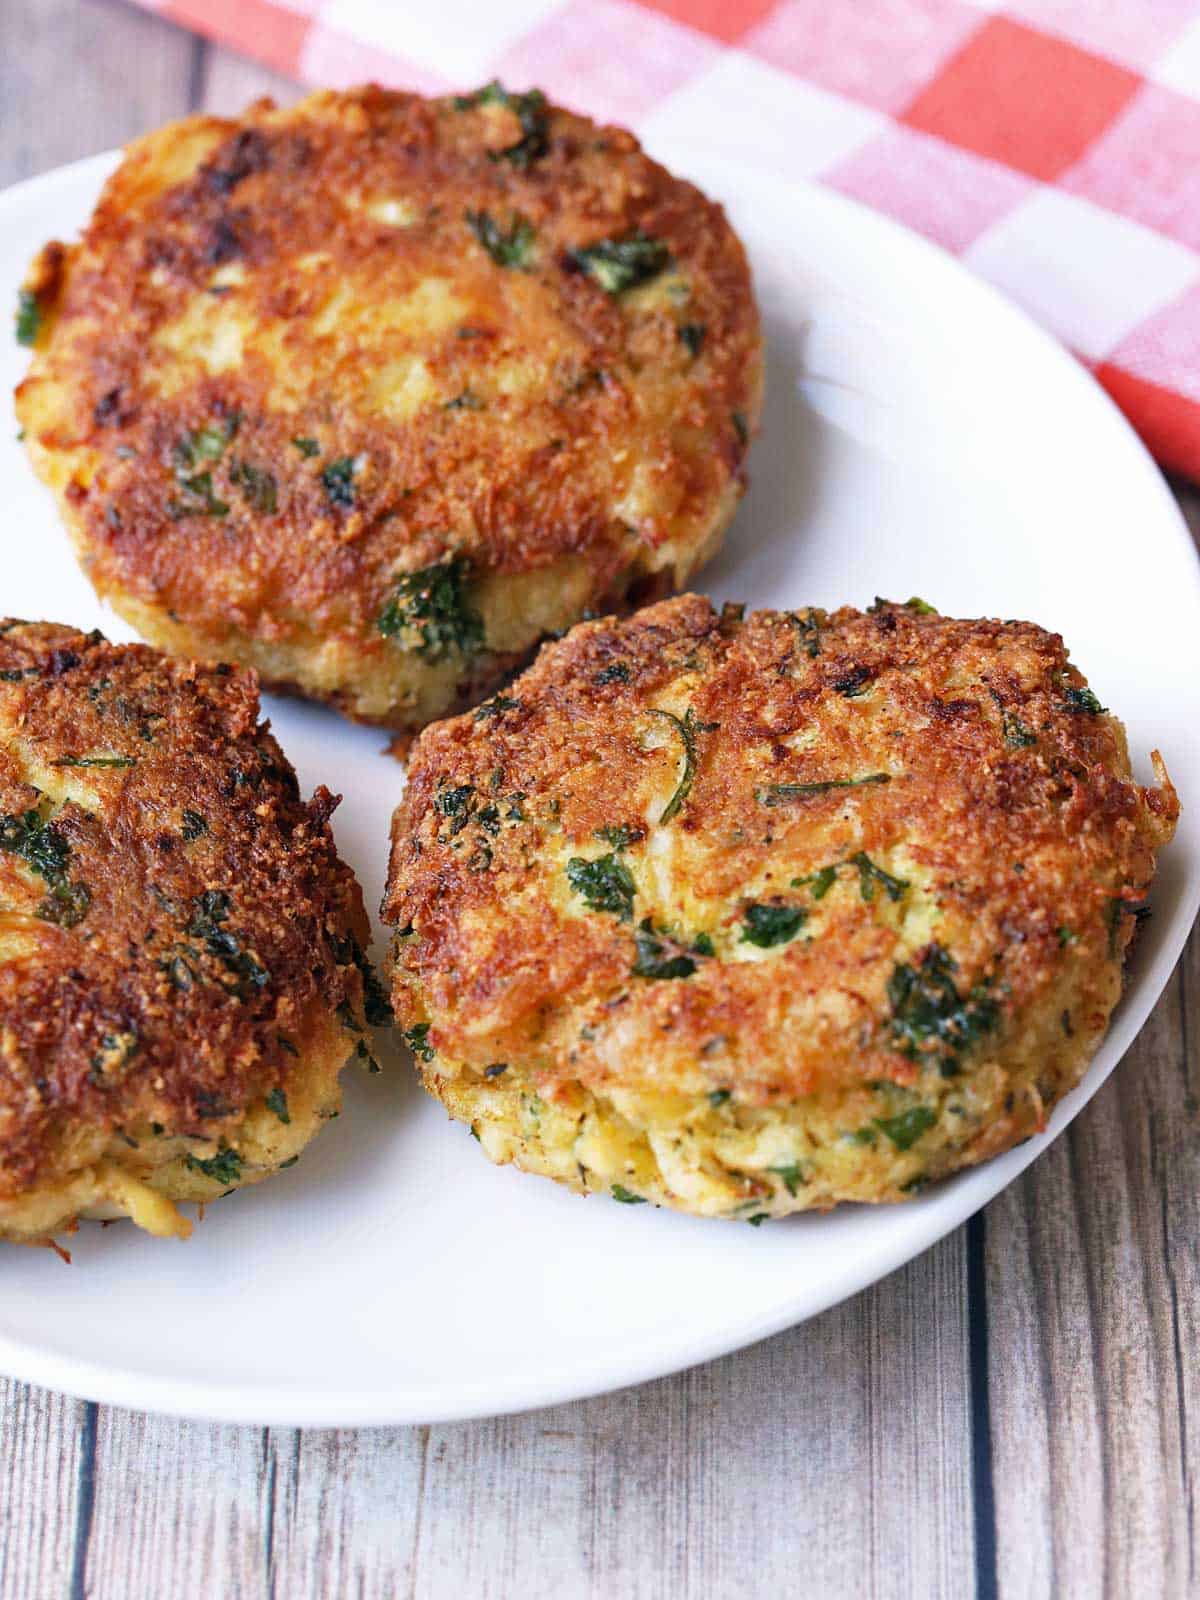 Three keto crab cakes are served on a plate.